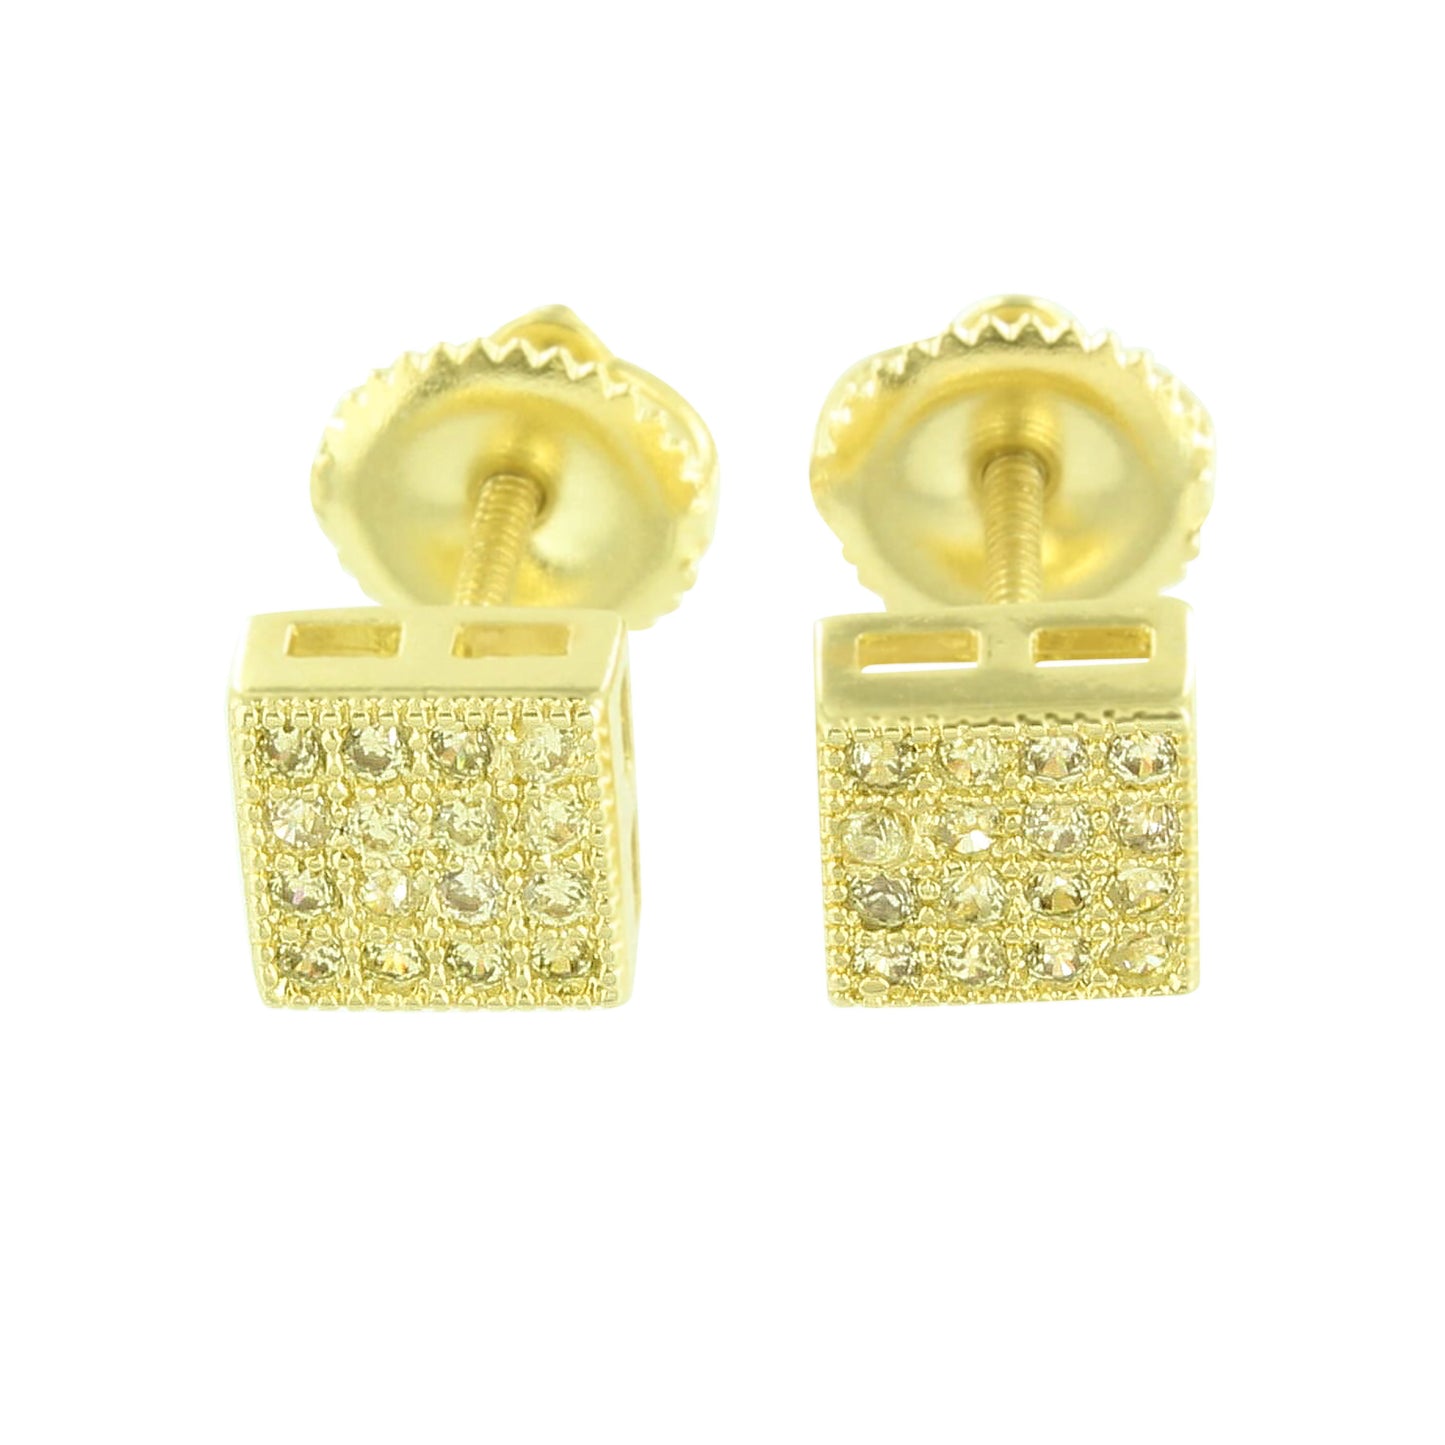 Yellow CZ Square Earrings Yellow Gold Finish Earrings Brand New